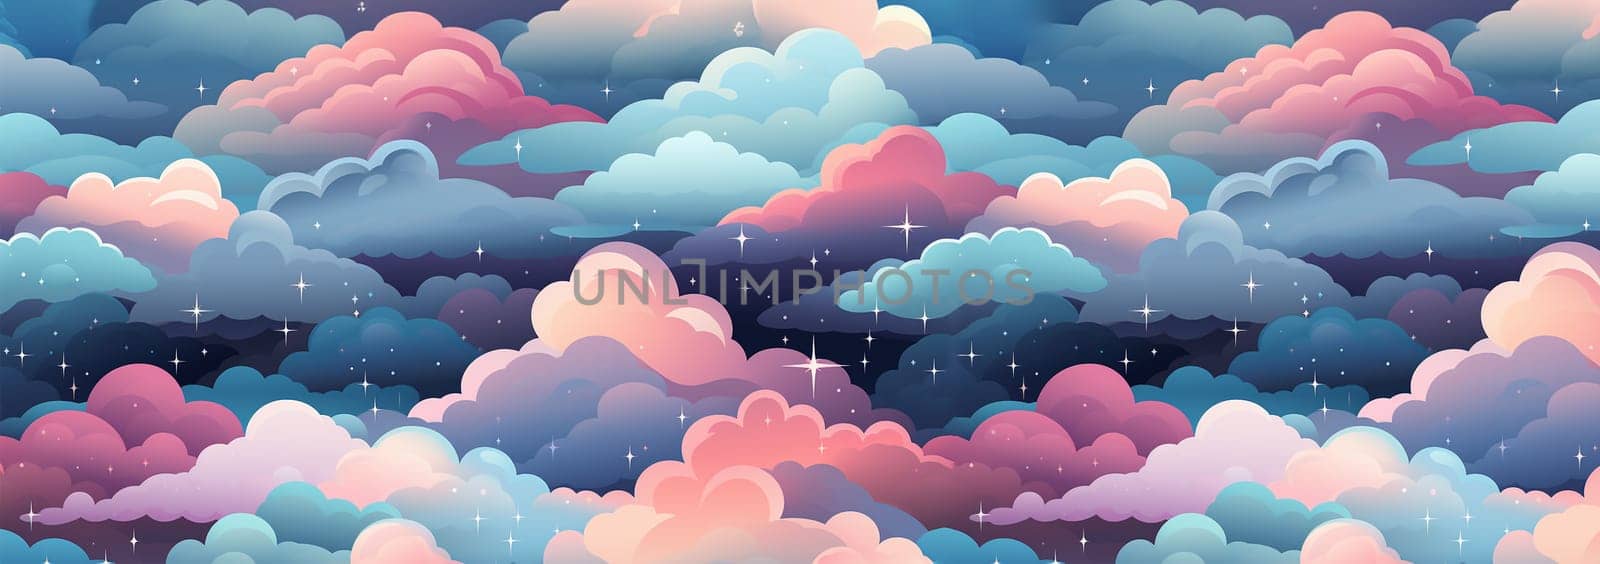 Banner Cute colorful pastel clouds seamless pattern background. Rainbow unicorn background with clouds and stars. Pastel color sky. Magical landscape, abstract fabulous pattern. Cute candy wallpaper. by Annebel146